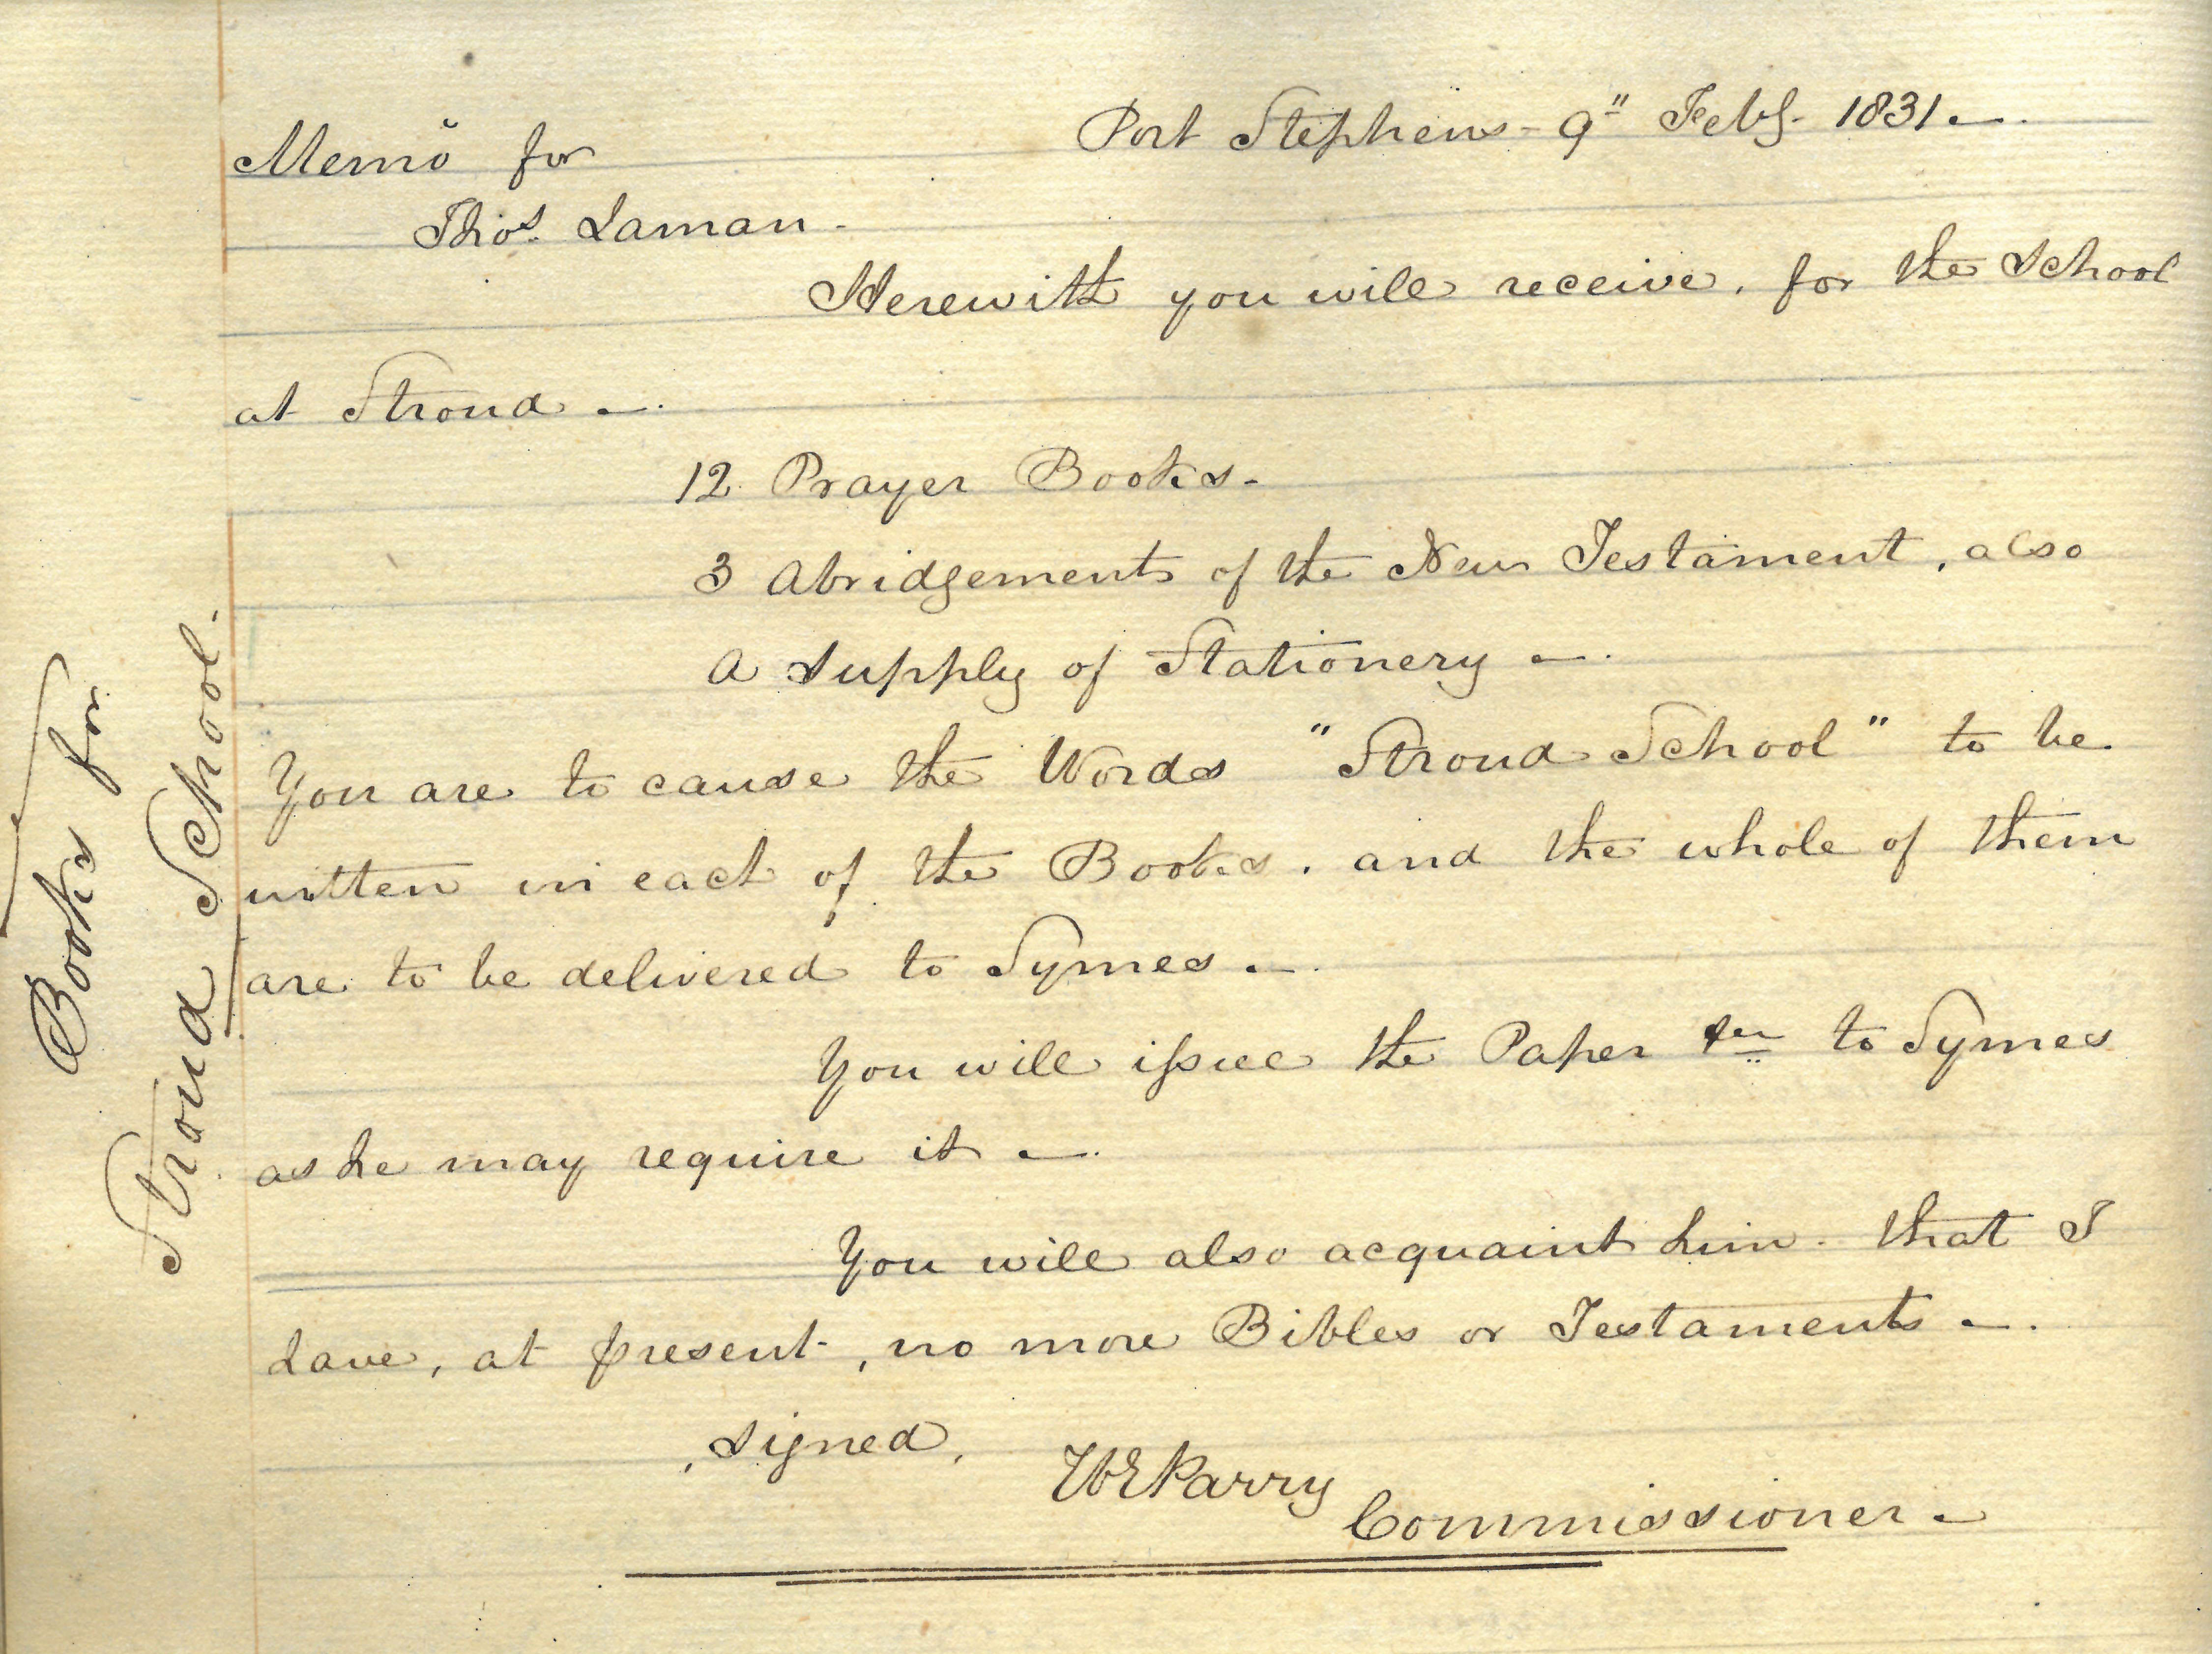 Memorandum by Commissioner William Parry regarding supply of prayer books, bibles, and stationery for Stroud School on the Port Stephens Estate, New South Wales, 9 February 1831 (1-14-2).